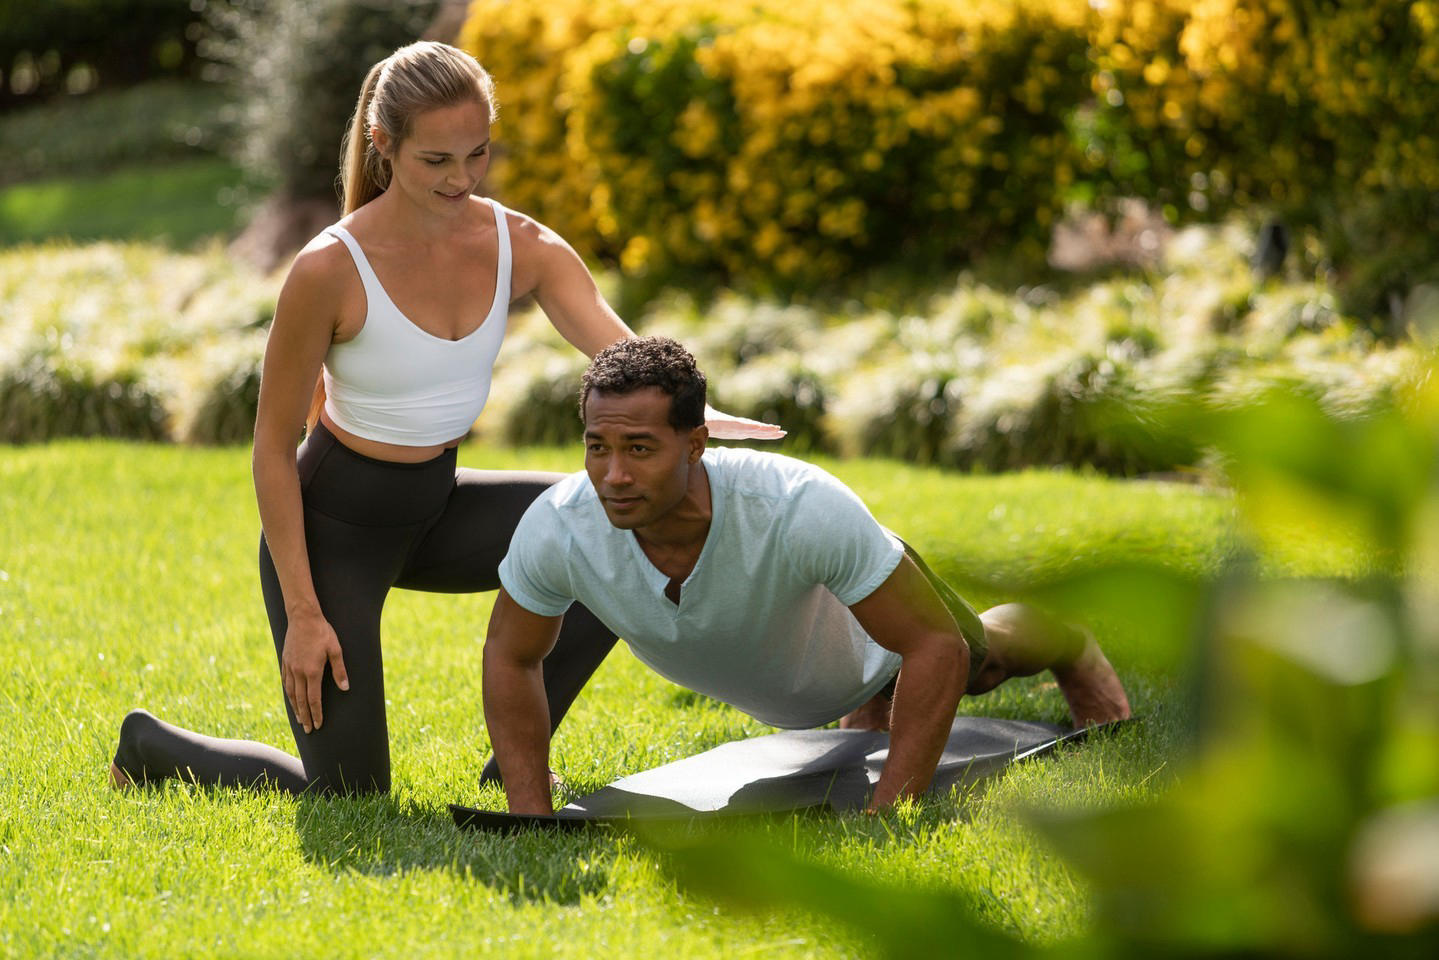 Four Seasons Westlake Village - Discover wellbeing your way